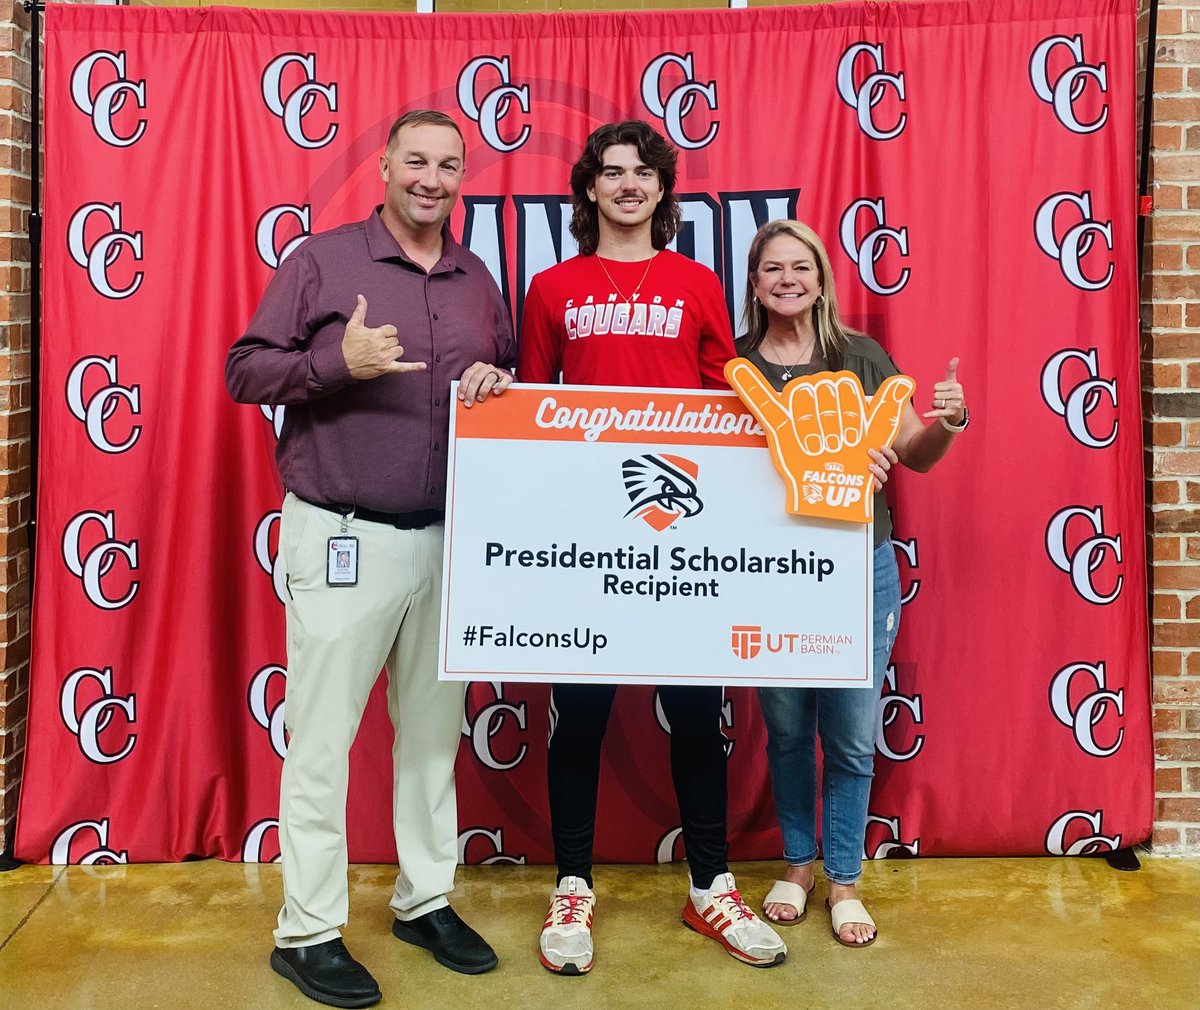 @utpb was at @canyonhscougars giving @HughWalterWhite the presidential scholarship! Thanks for visiting our campus and investing in our student athletes. You are getting a great one!